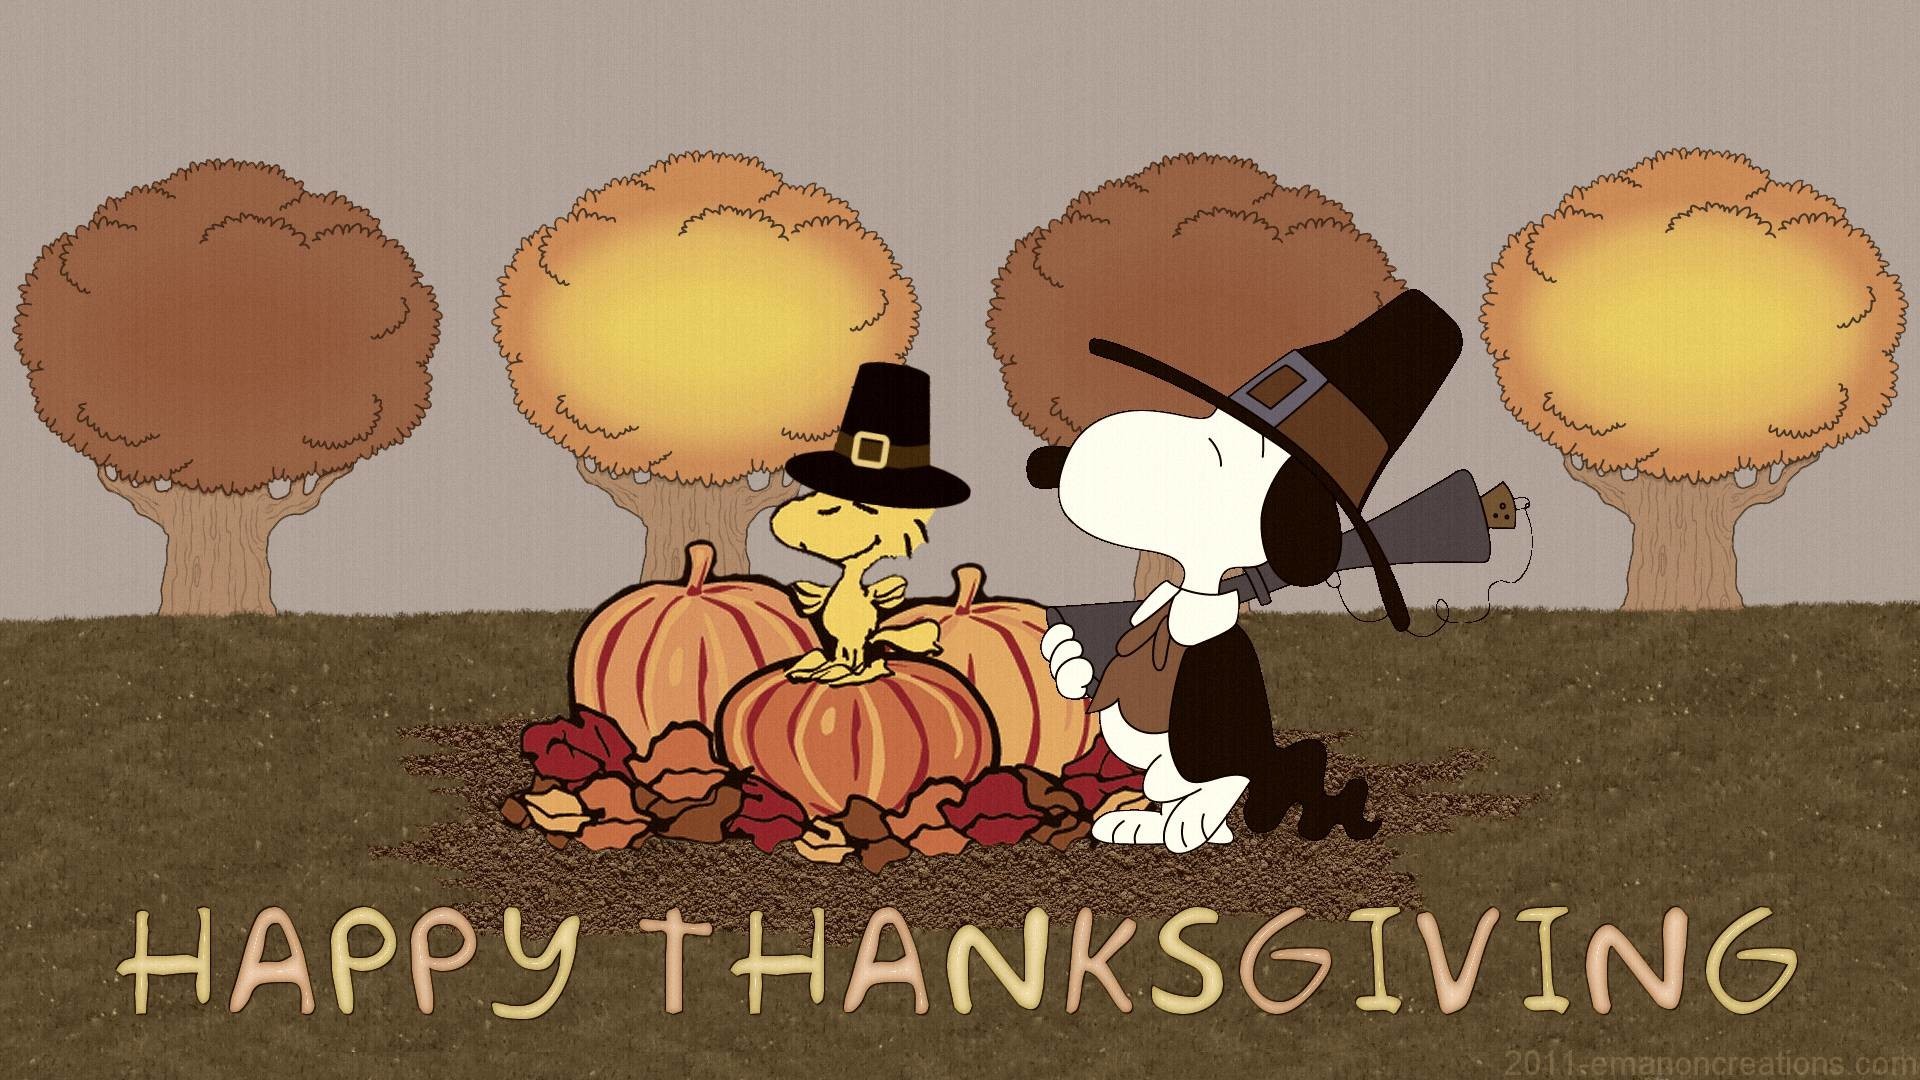 1920x1080 Happy Thanksgiving Day HD Wallpapers | HD Wallpapers | Pinterest .